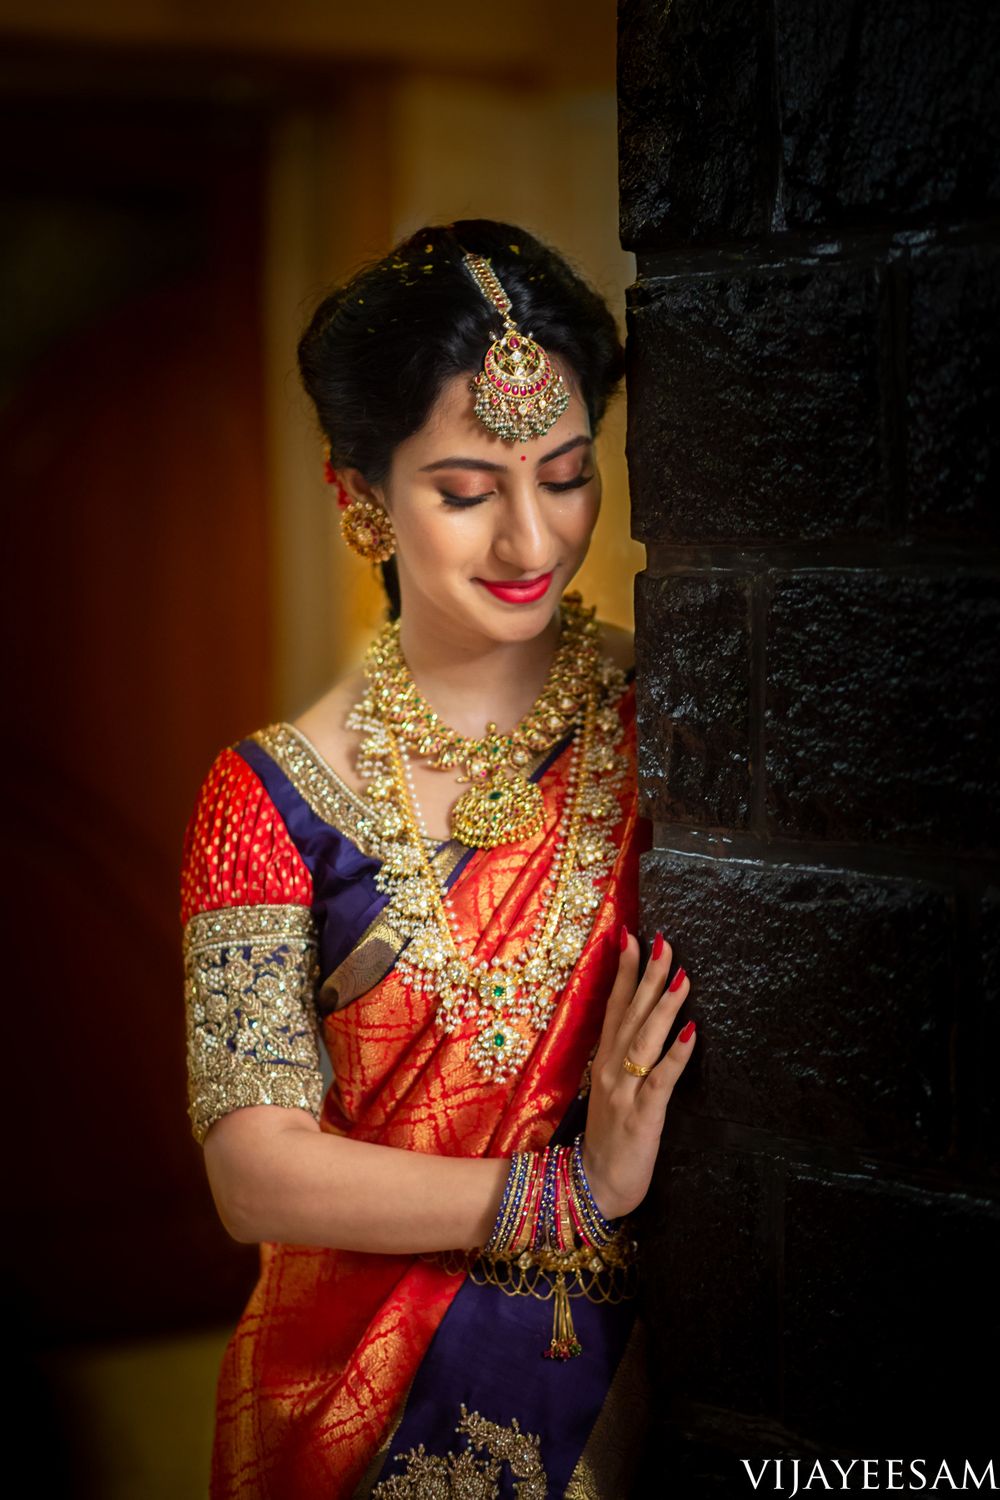 Photo of A coy South Indian bride wearing a red and blue saree with temple jewellery